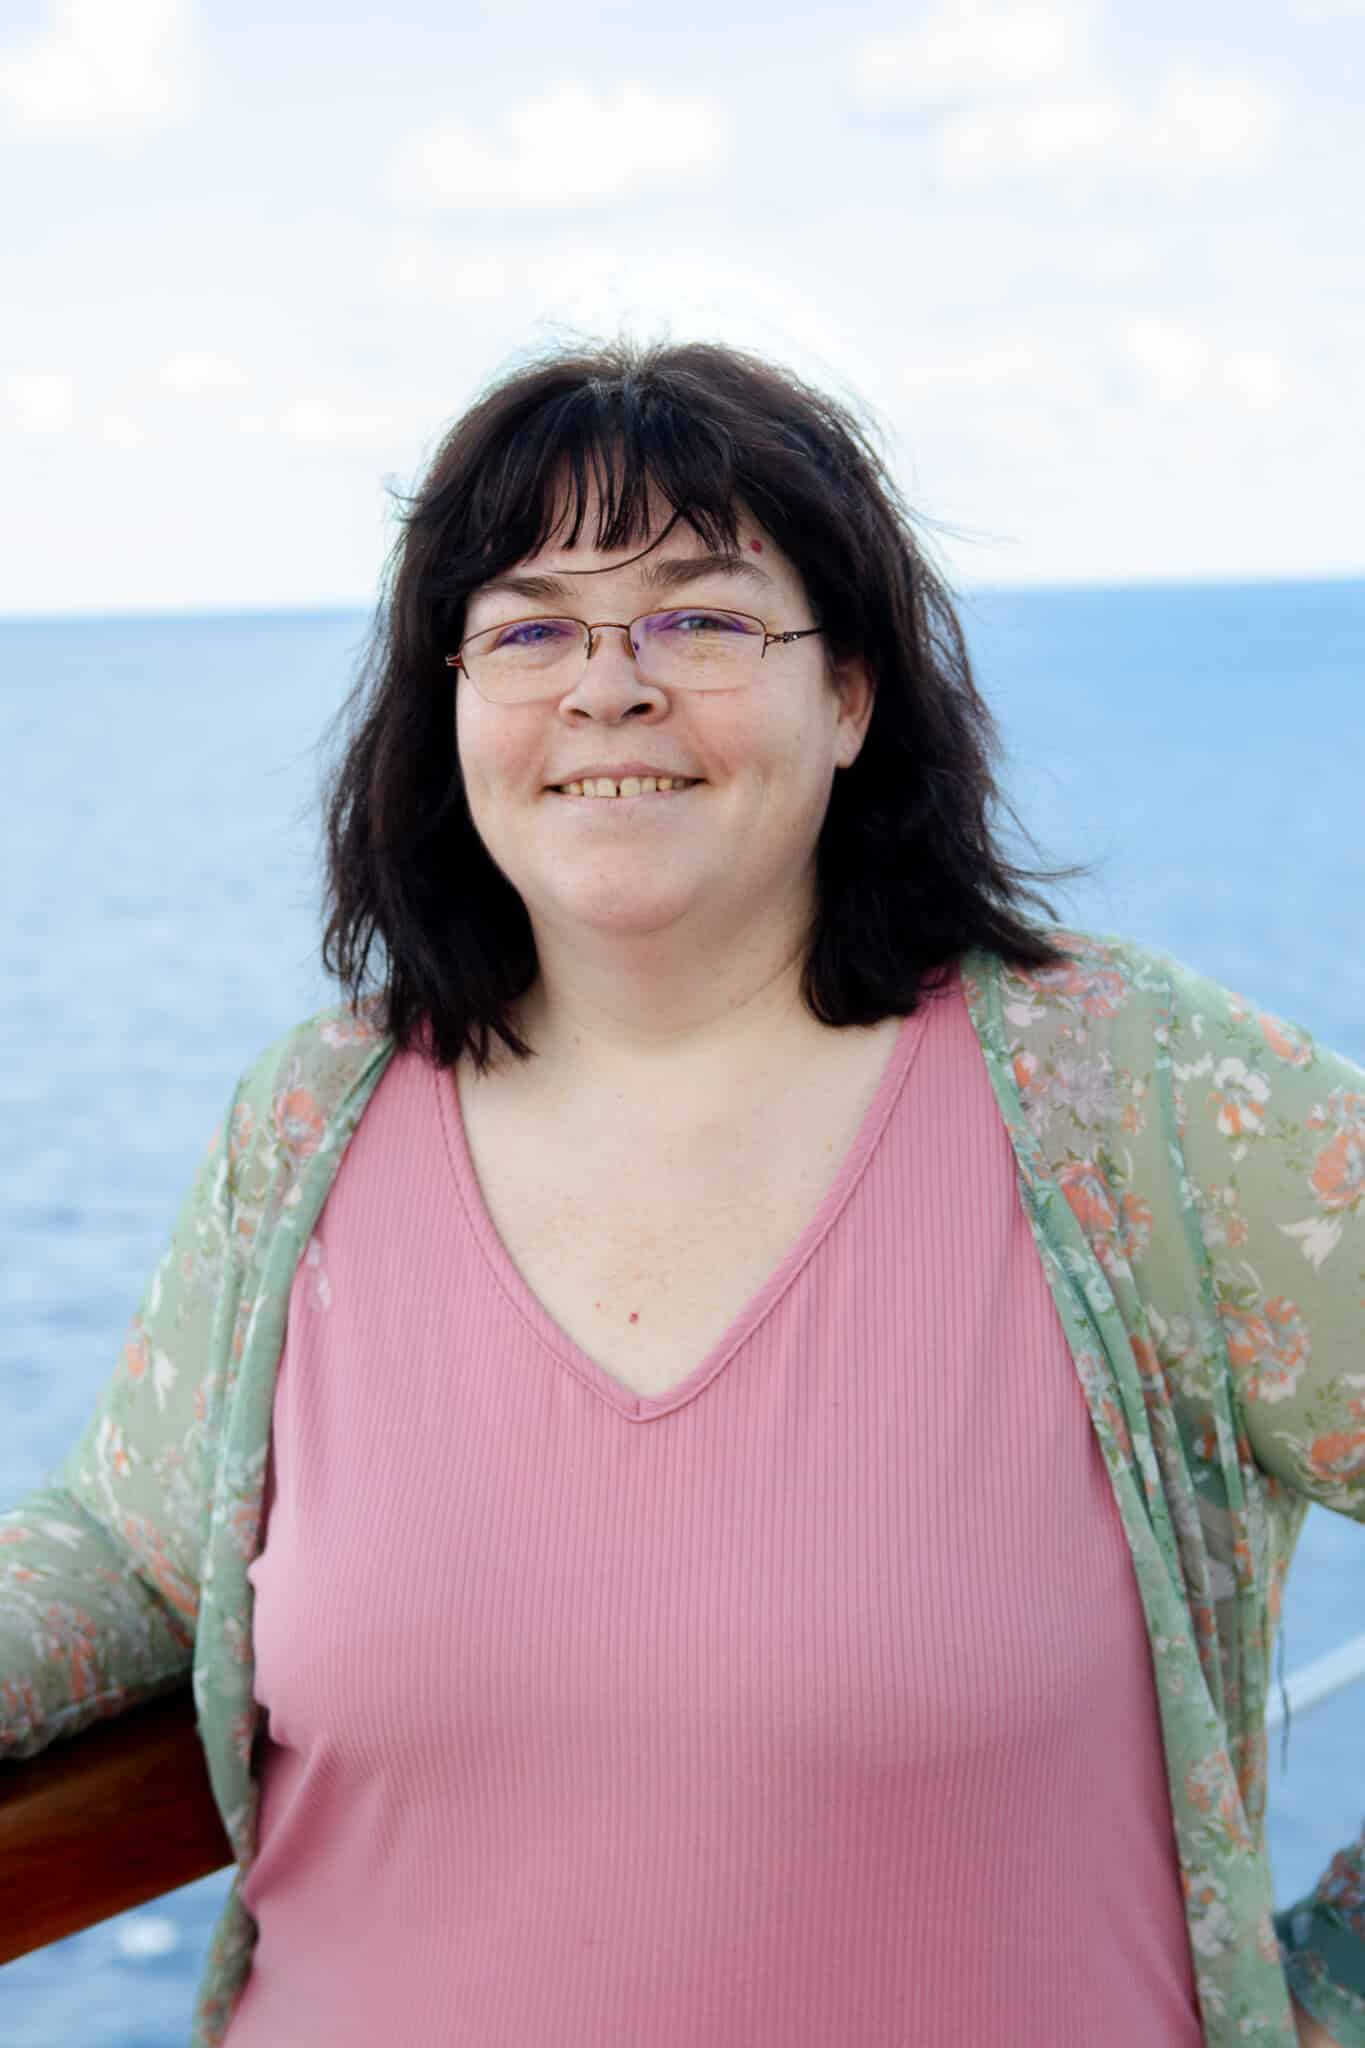 Mary, Mental Health SEO Specialist, outside over the ocean smiling. Mary is a technical SEO Specialist for mental health counseling and therapy websites in the United States, United Kingdom, Canada, and beyond.